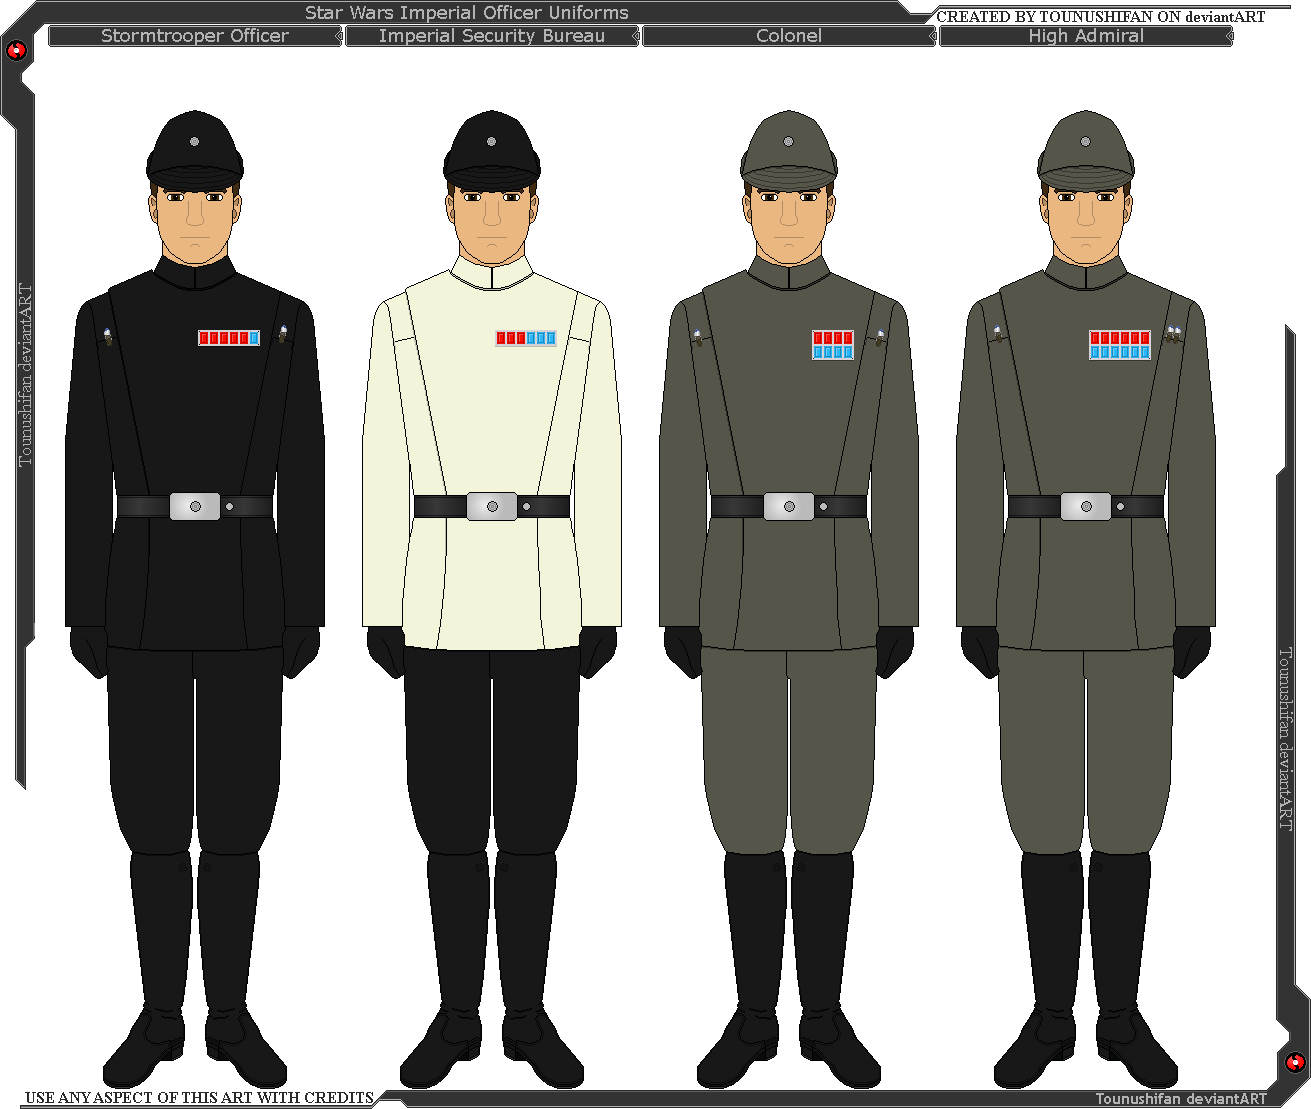 Star Wars canon ranks of Imperial Navy